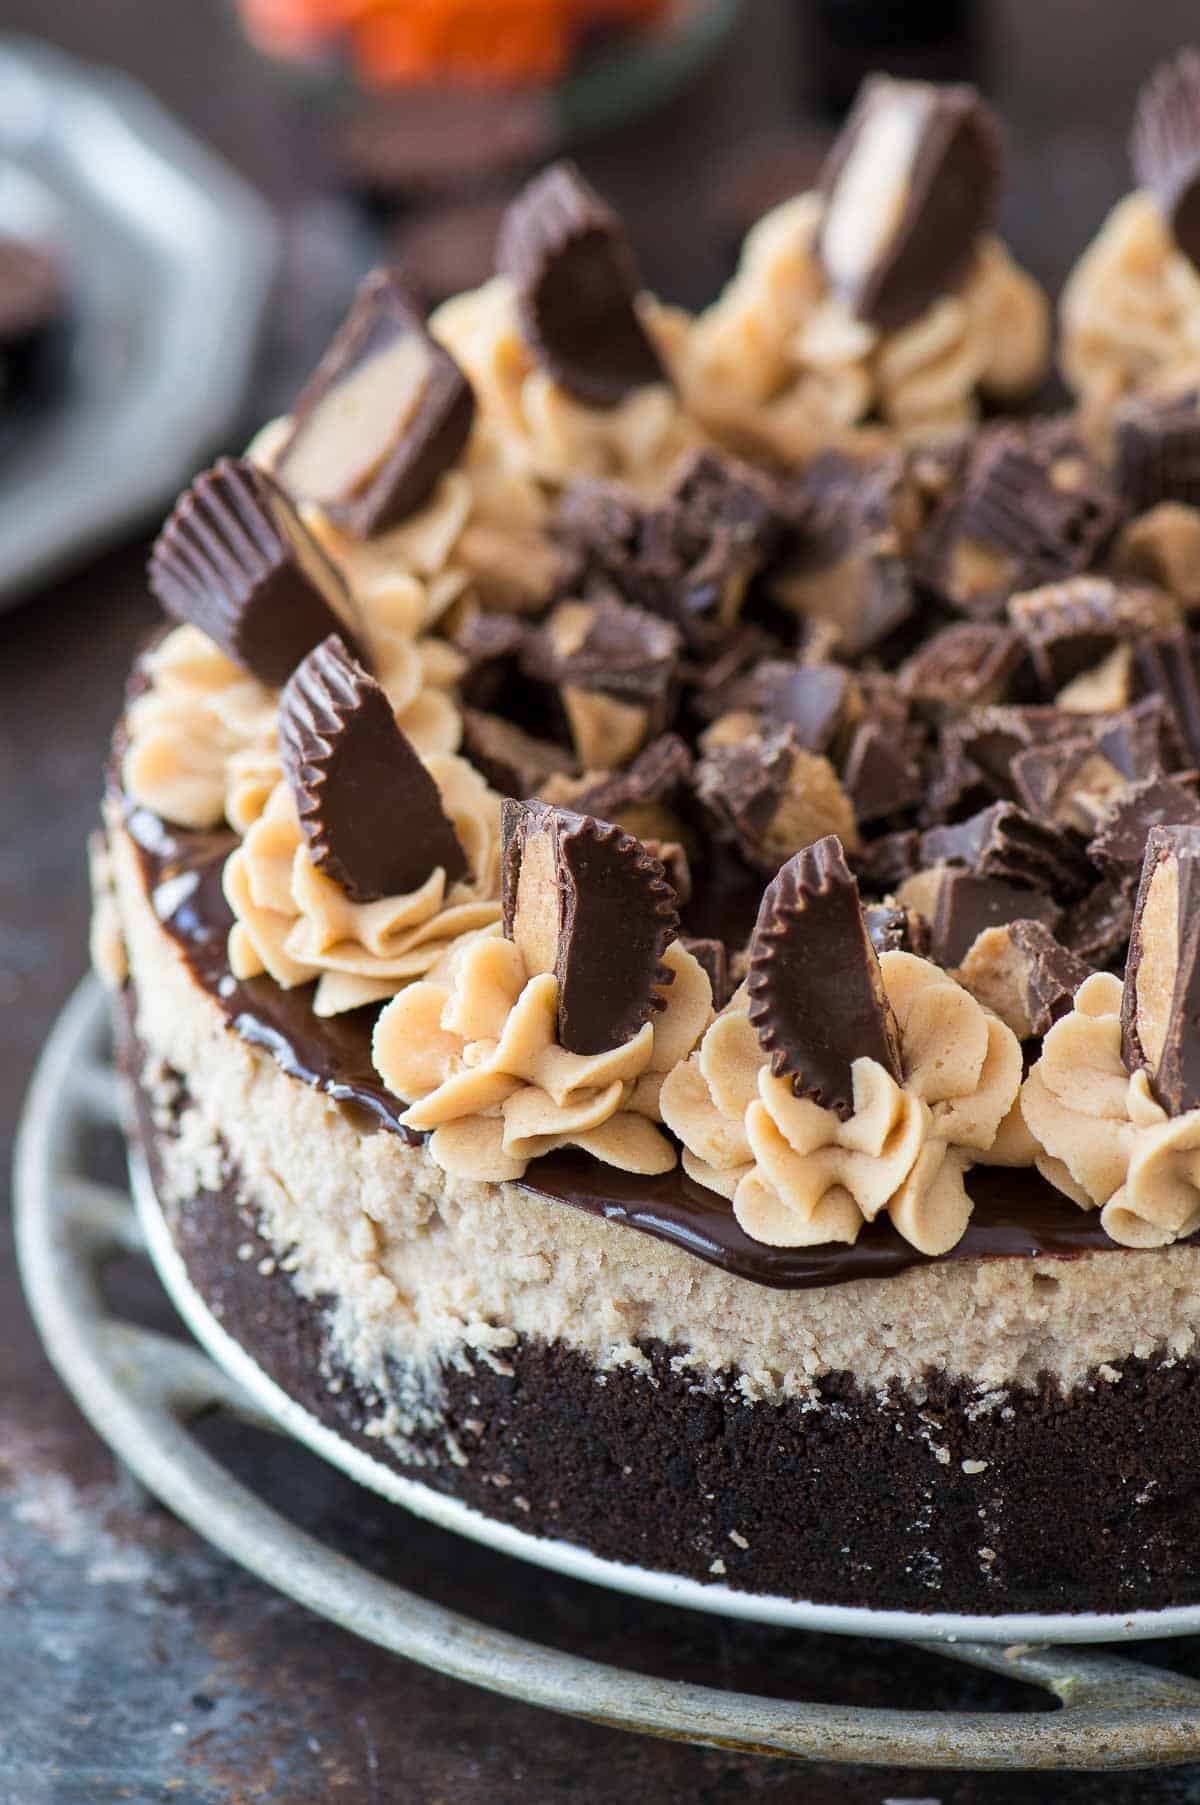 reese's cheesecake with chocolate ganache and more reese's cup on metal plate